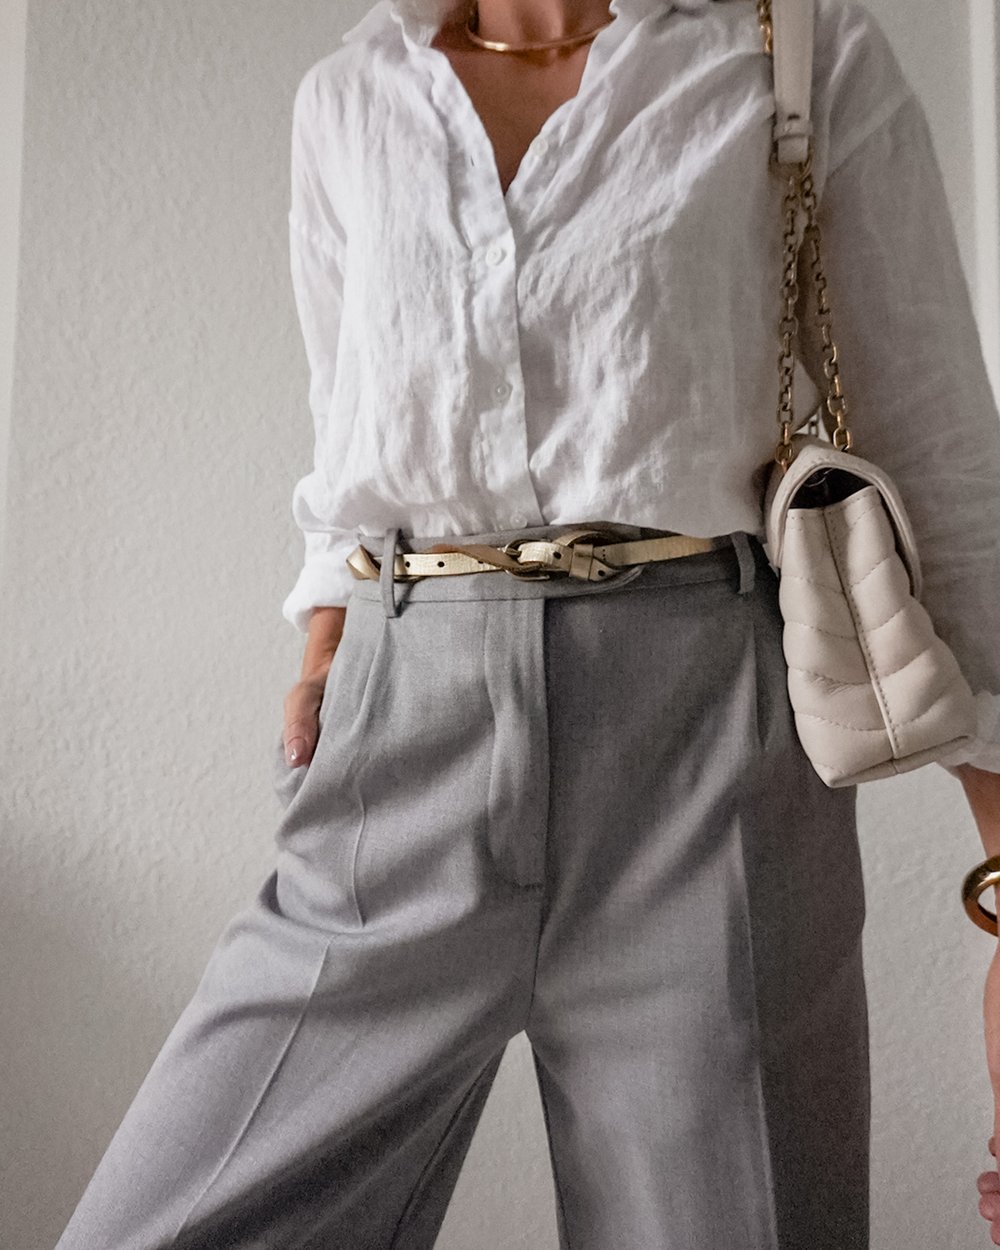  Jessica Ashley wearing Linen blouse with grey trousers and gold belt | linen blouse outfit ideas | click to shop this look 